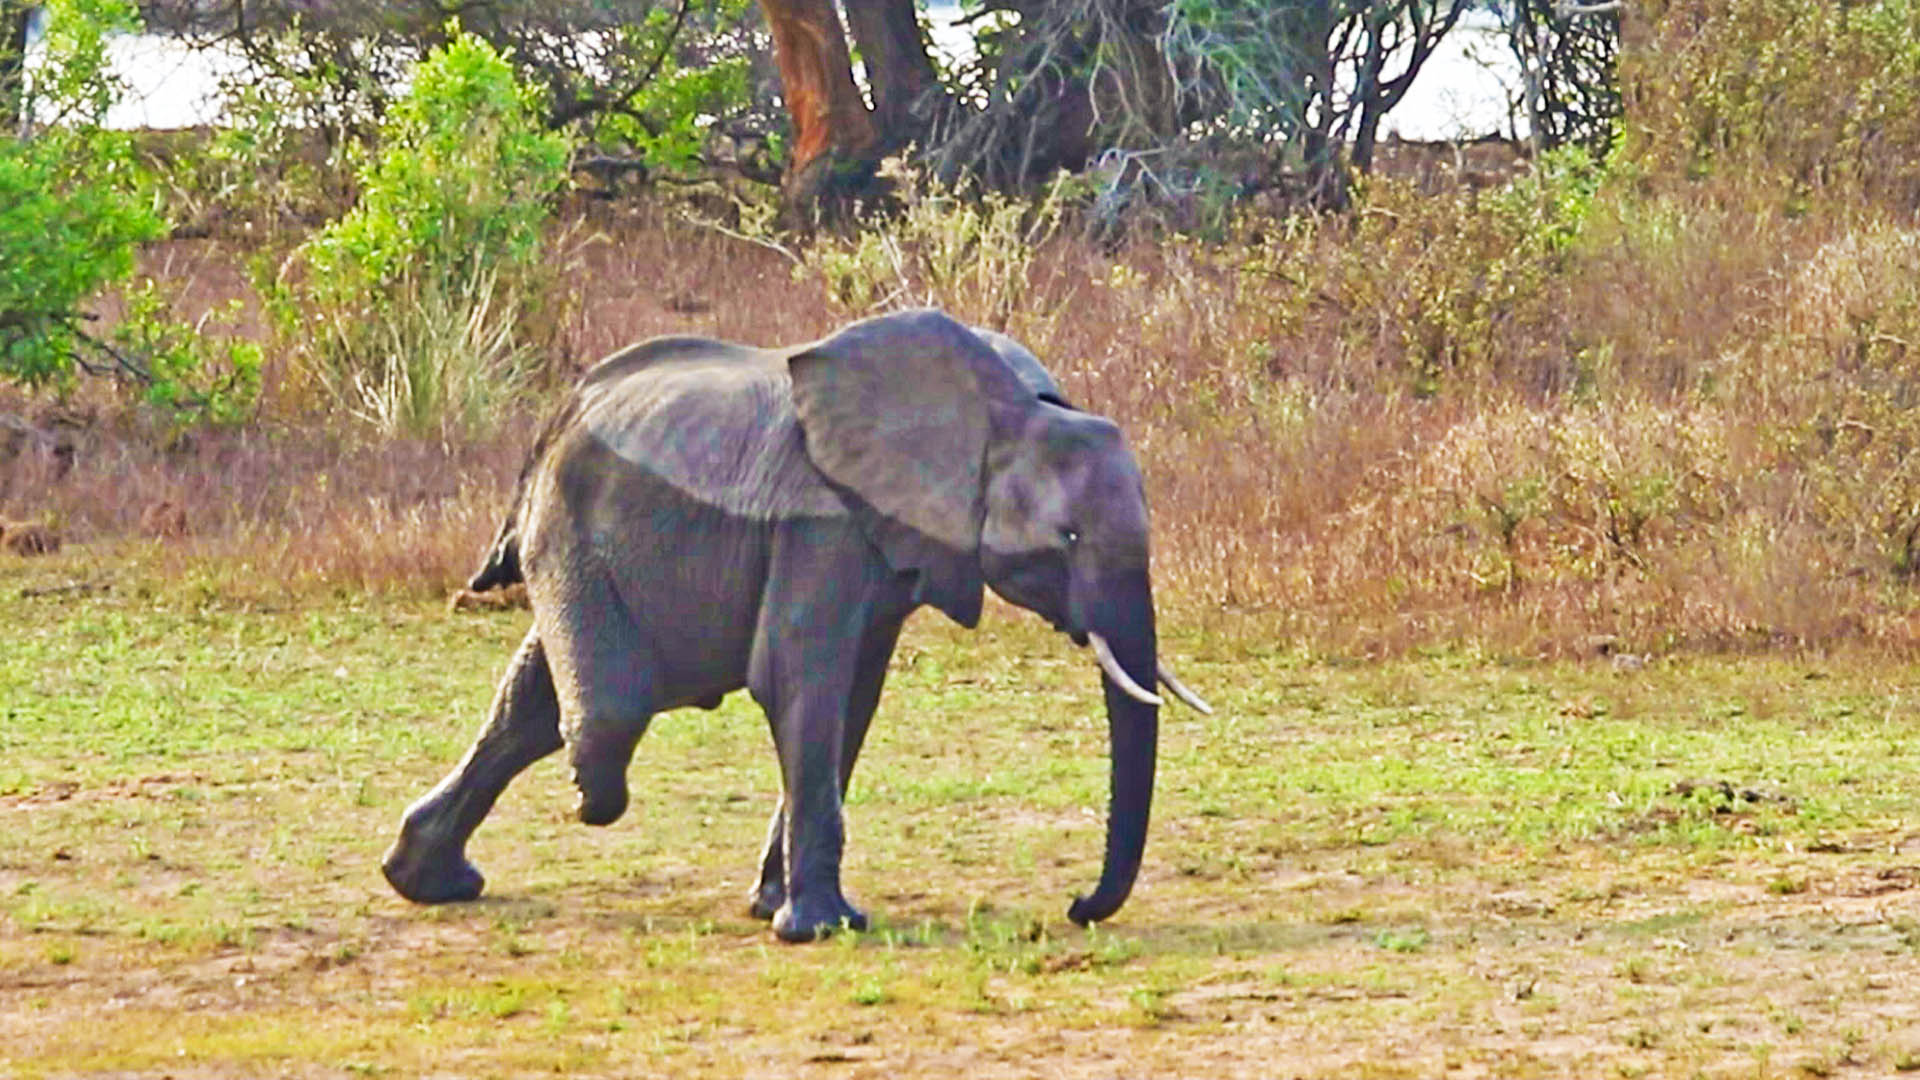 This is How an Elephant Walks With 3 Legs